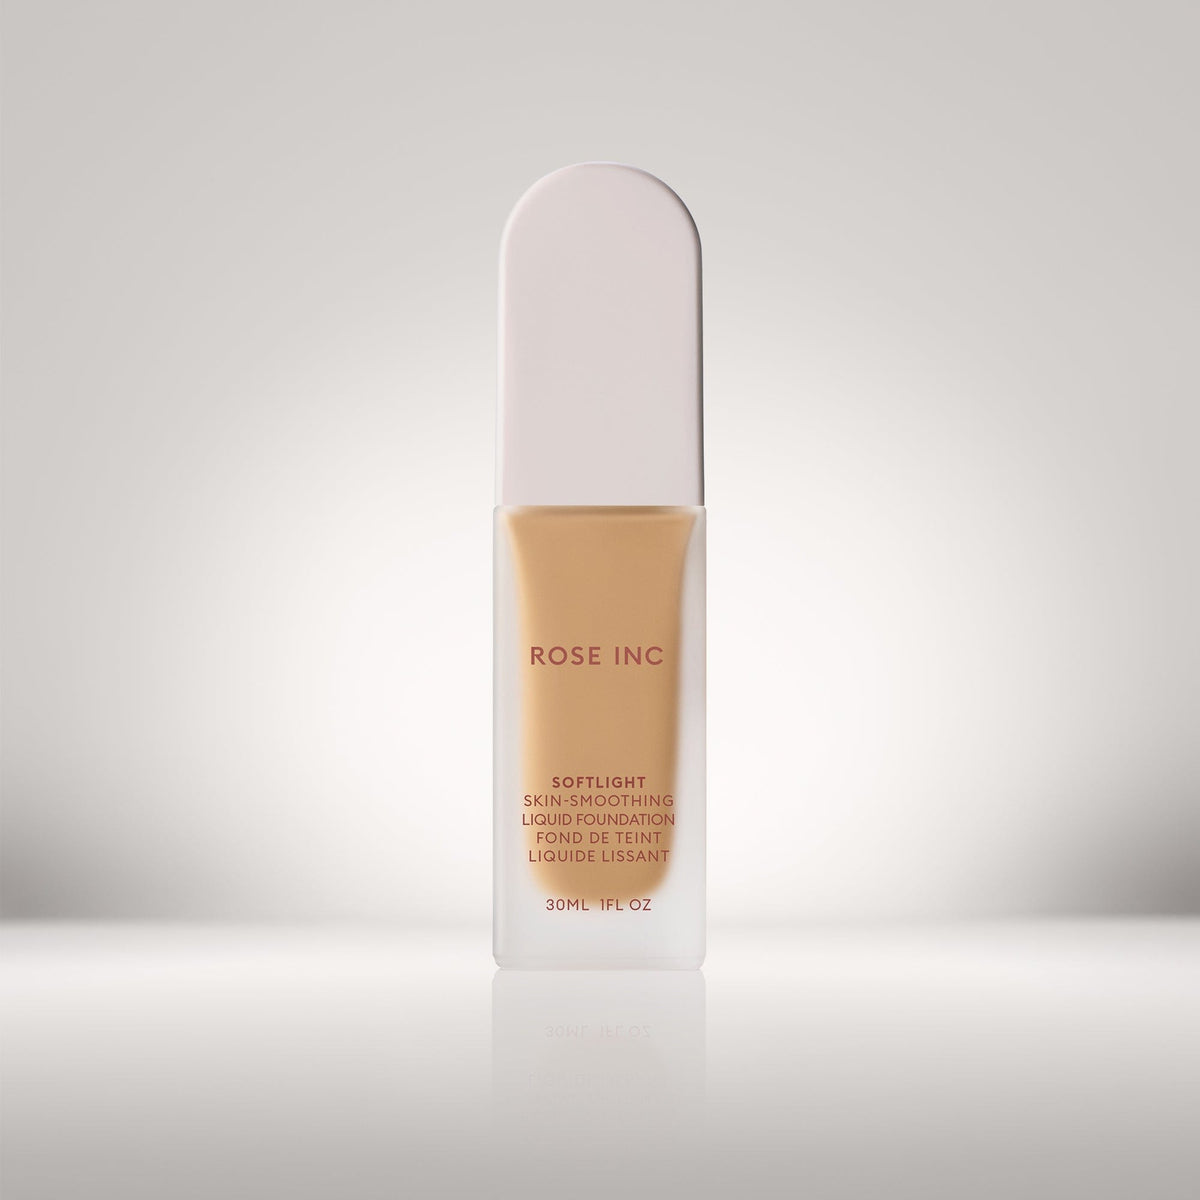 Soldier image of shade 16W in Softlight Smoothing Foundation